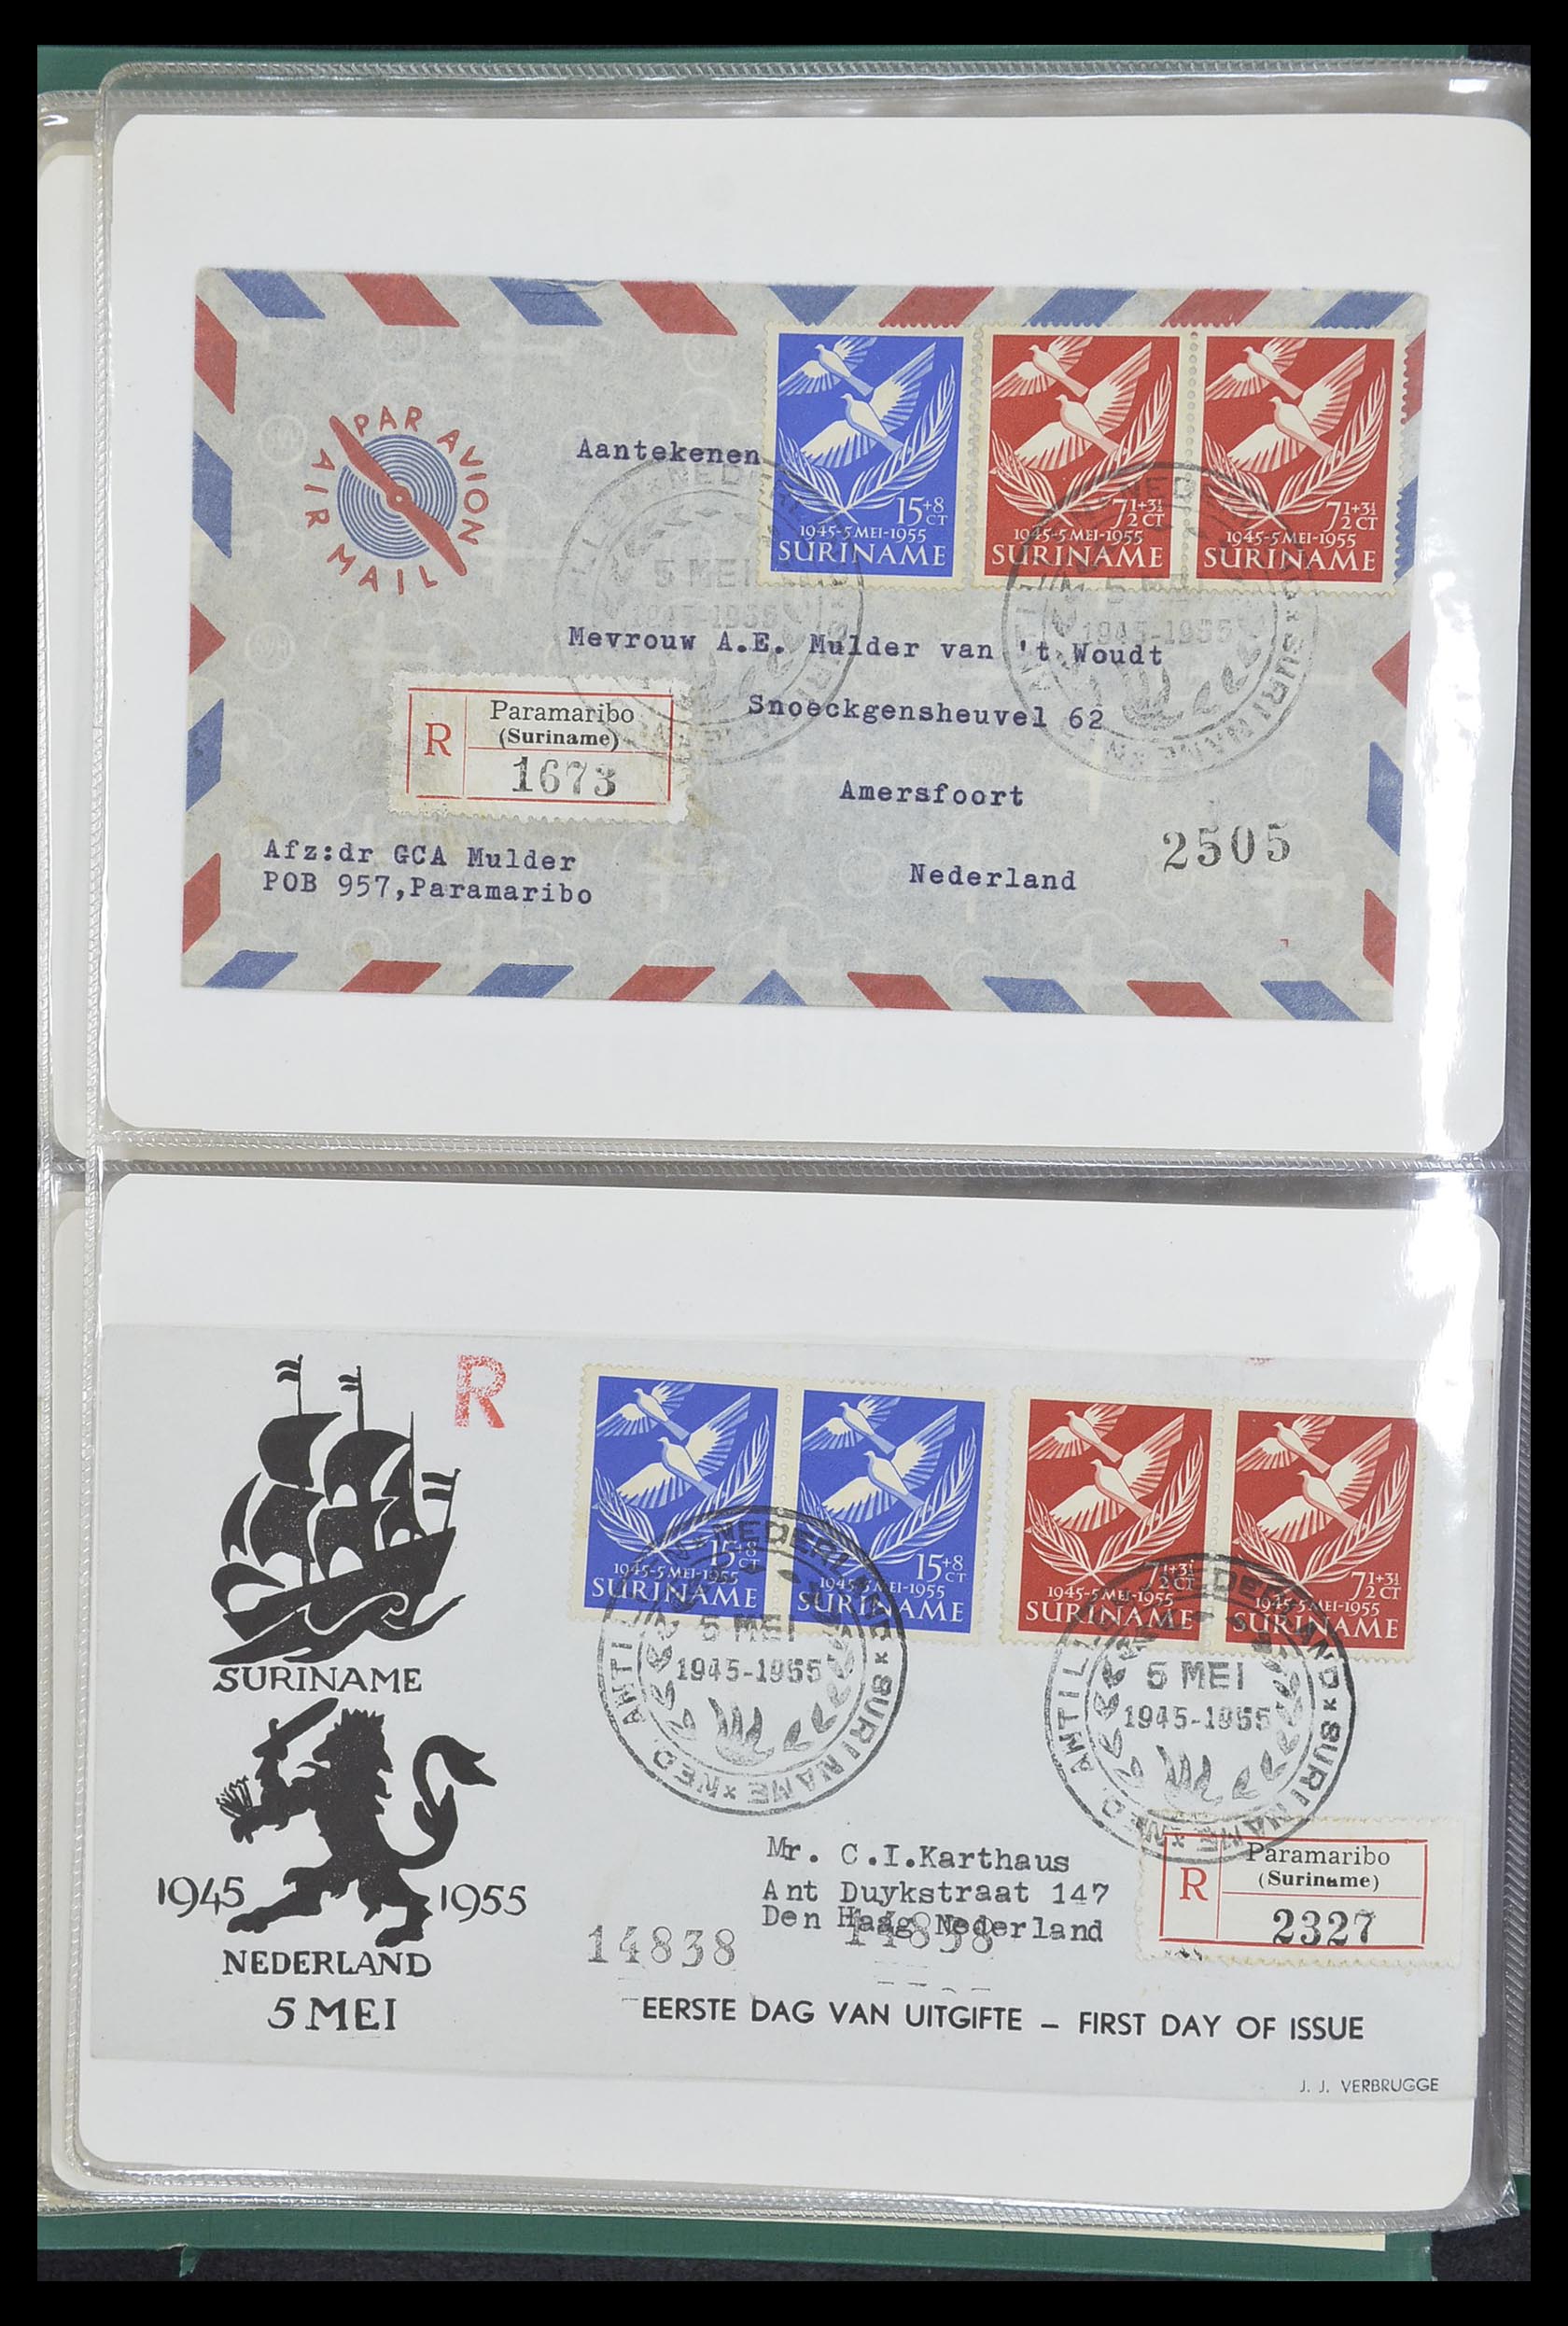 33333 061 - Stamp collection 33333 Dutch territories covers 1873-1959.